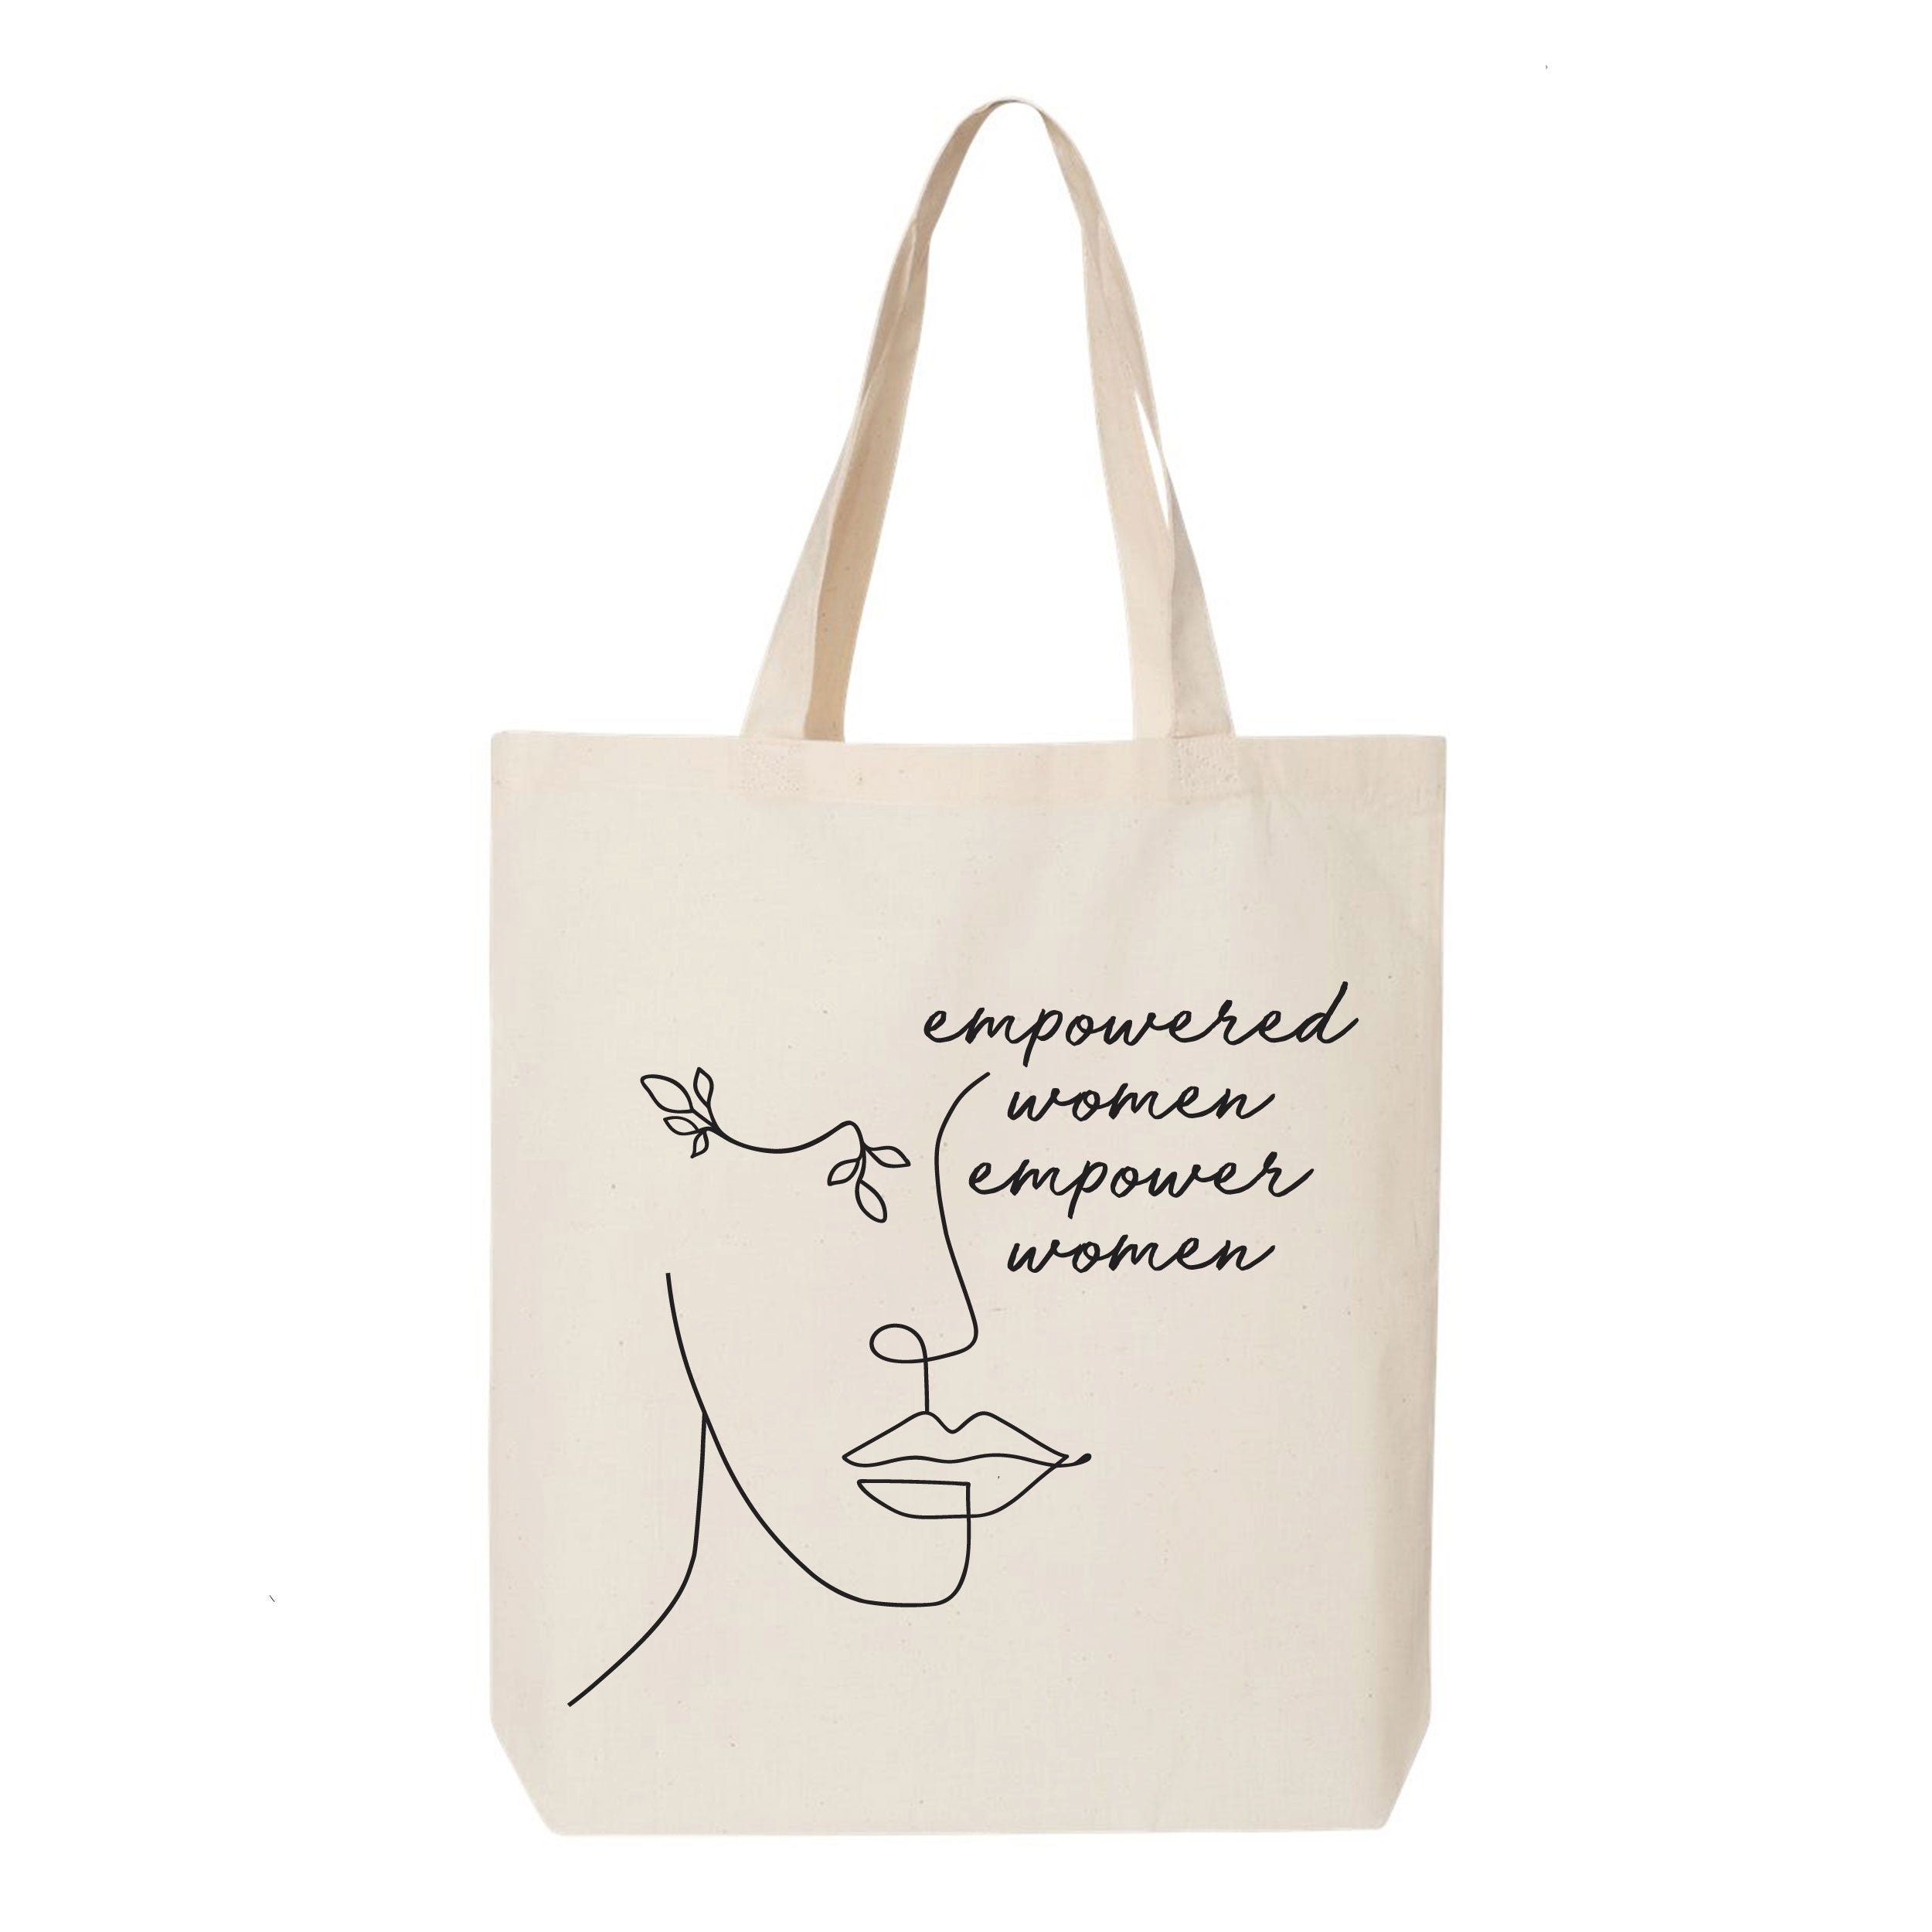 Empowered Women Empower Women Grocery Bag Feminist Tote Bag | Etsy